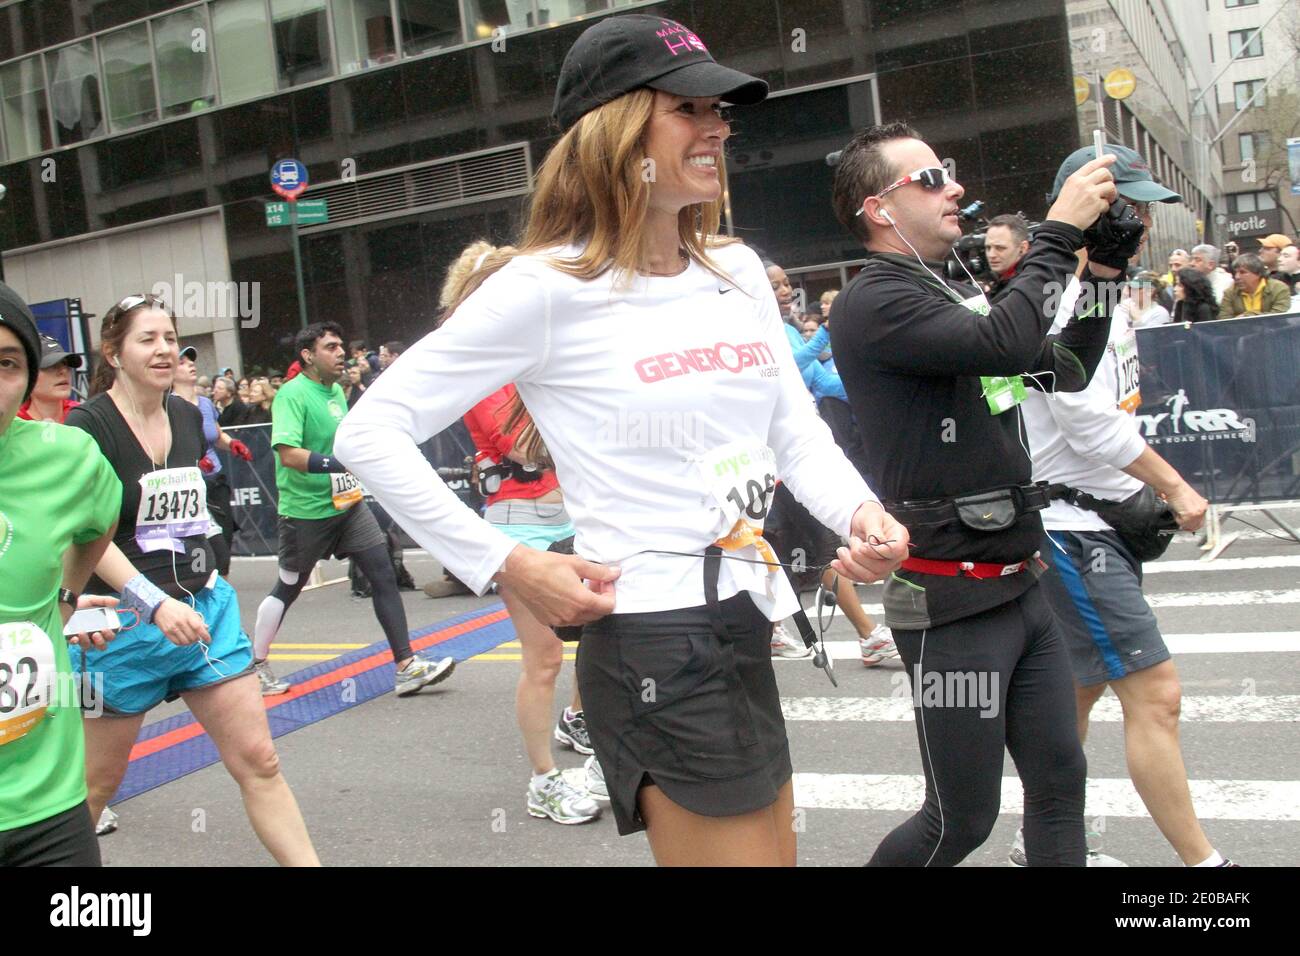 TV personality Kelly Killoren Bensimon running the New York City Half  Marathon, she crossing the finish line on 2:13:51 with a overall place  11418 in New York City, NY, USA on March